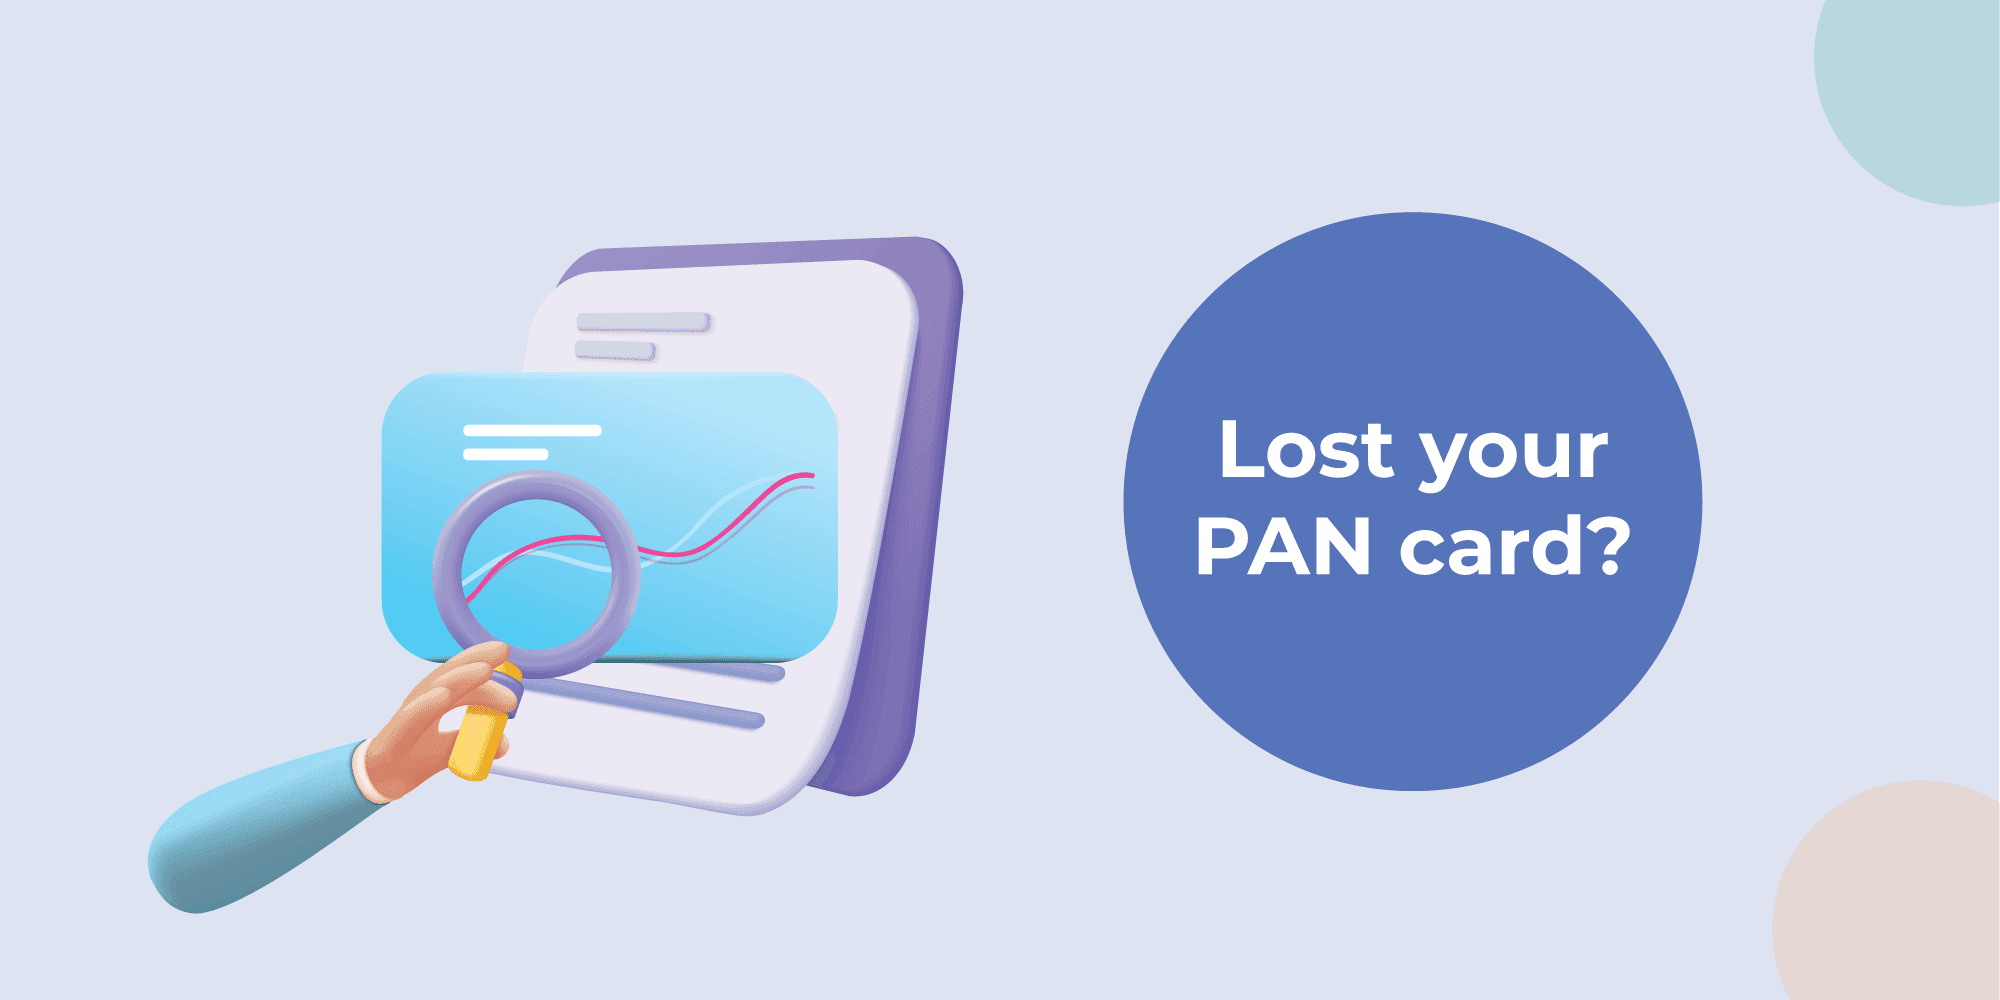 PAN card is lost? Here’s how to apply for a lost PAN card